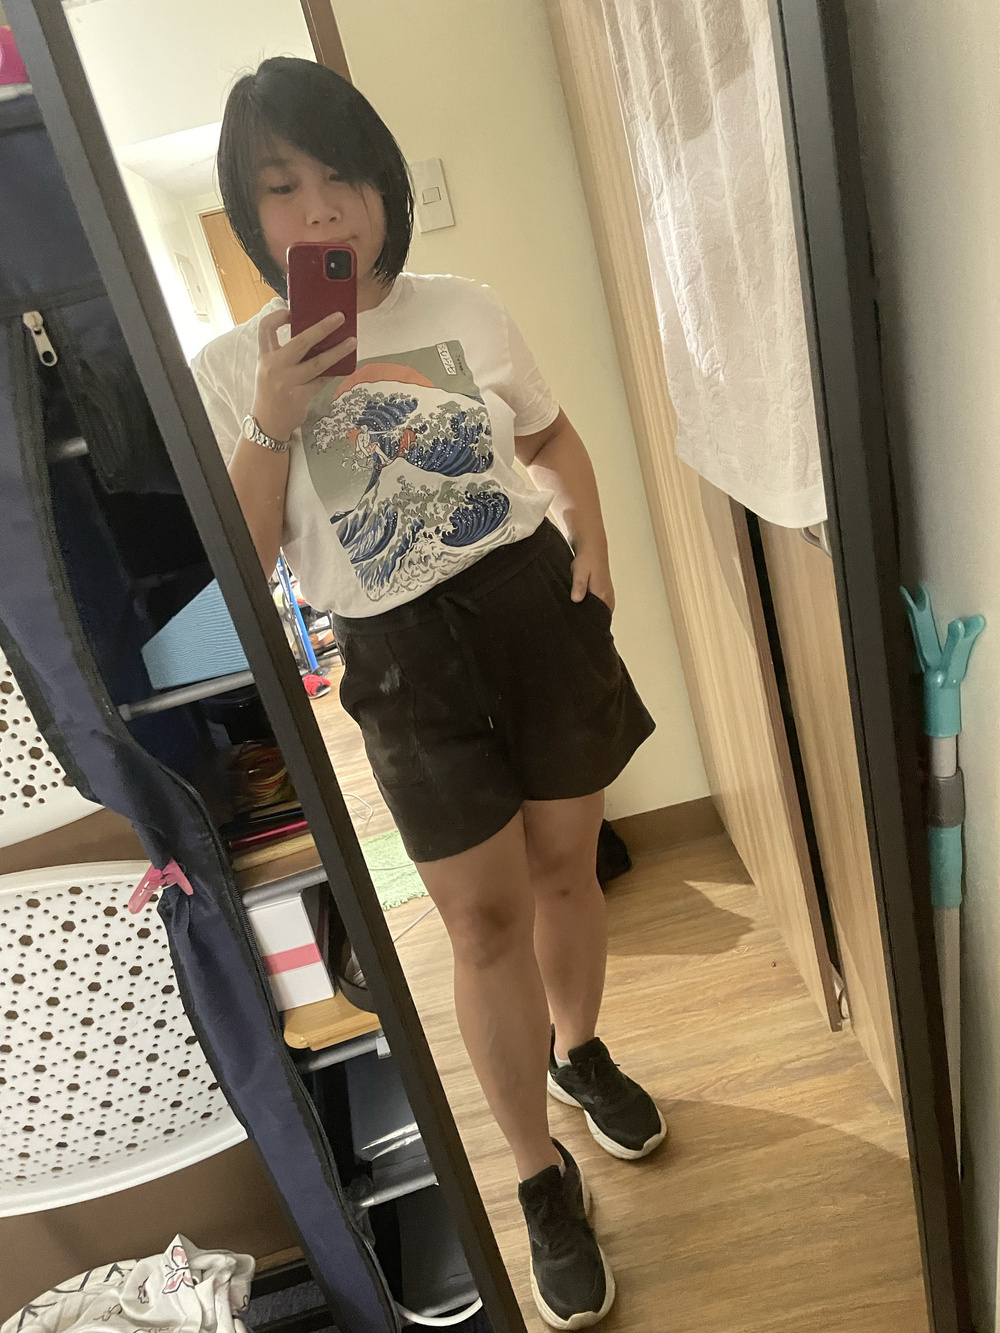 Chi showing her outfit for the day, which is a white shirt top with a print of the Kanagawa Waves, black shorts, and black rubber shoes.